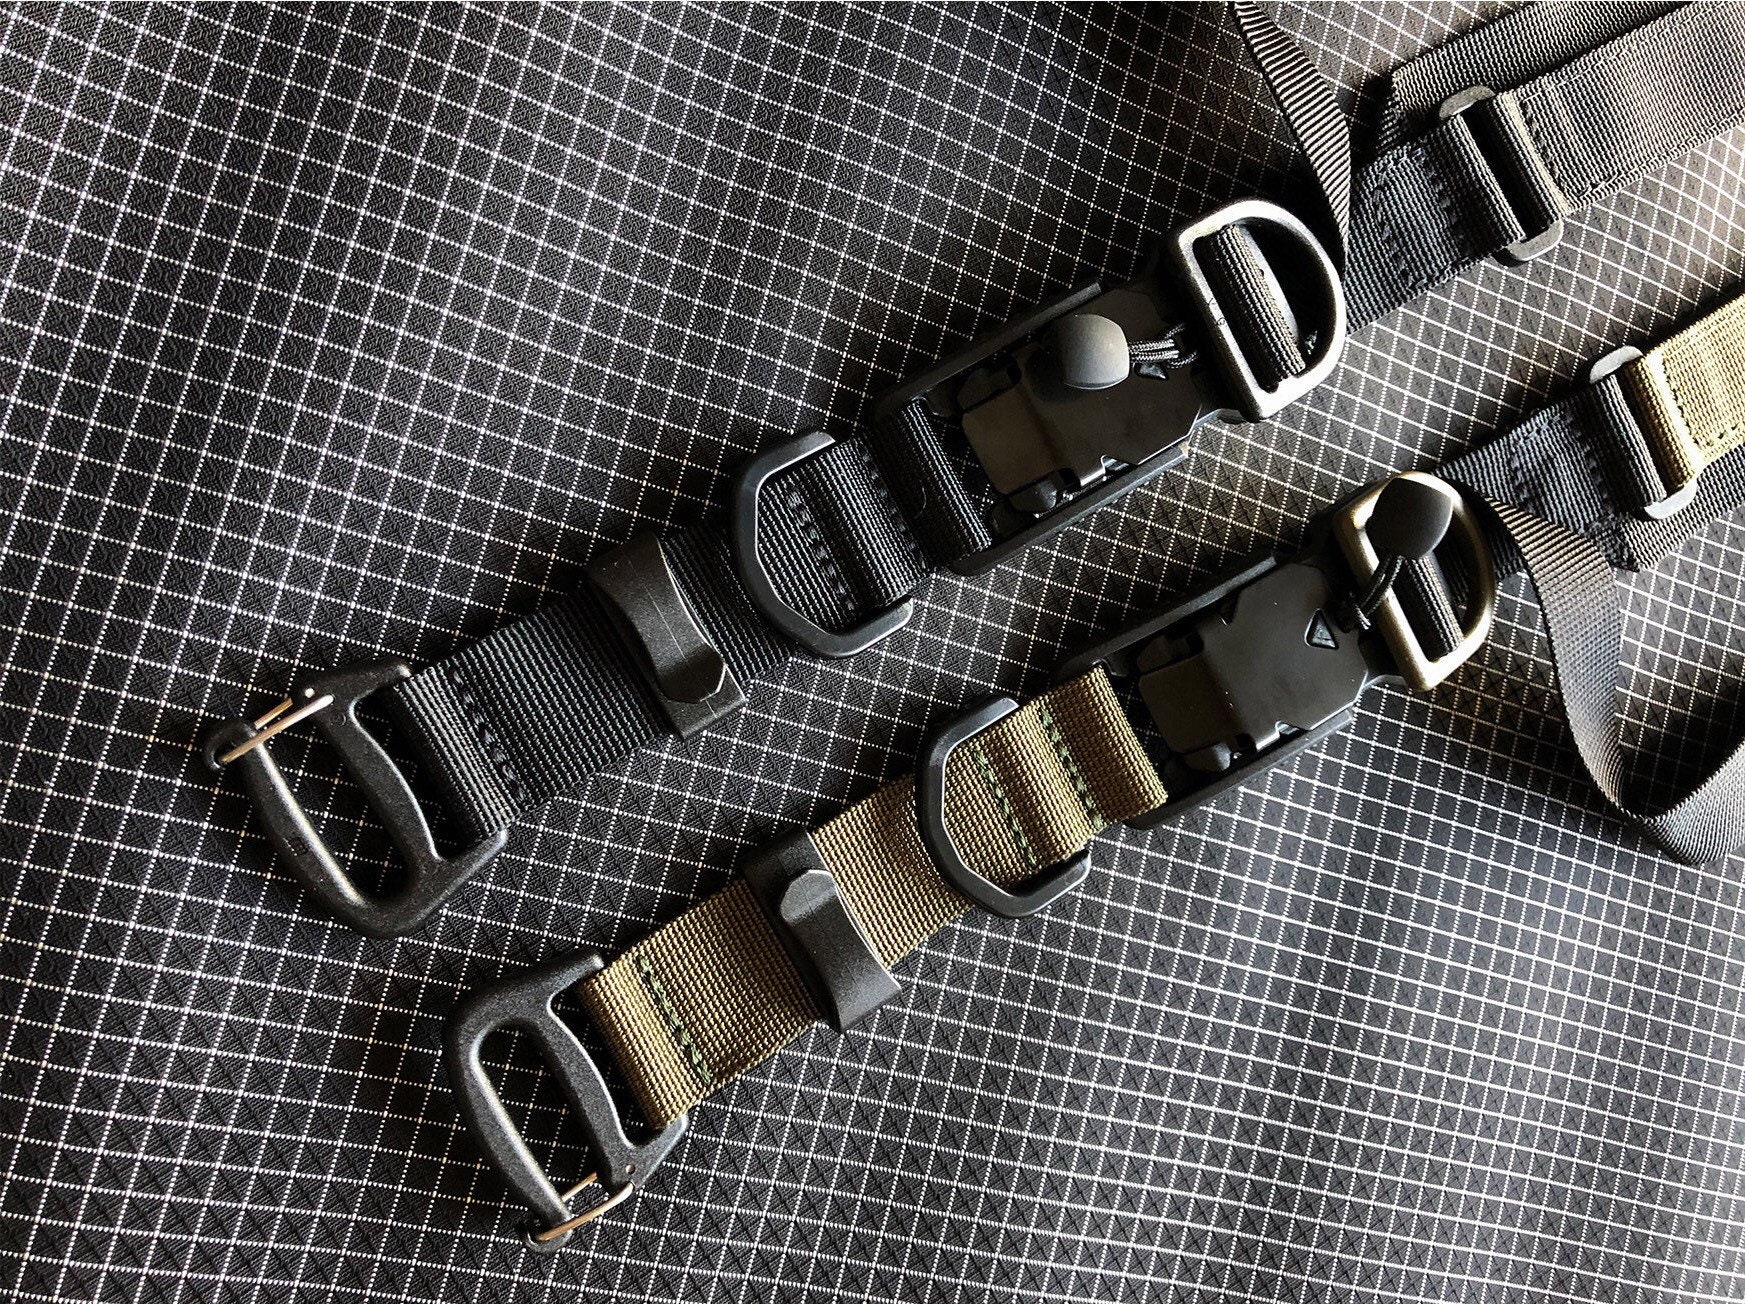 1 Fidlock V-Buckle Magnetic Techwear Belt Quick Release Gray / Large / Yes (Recommended)